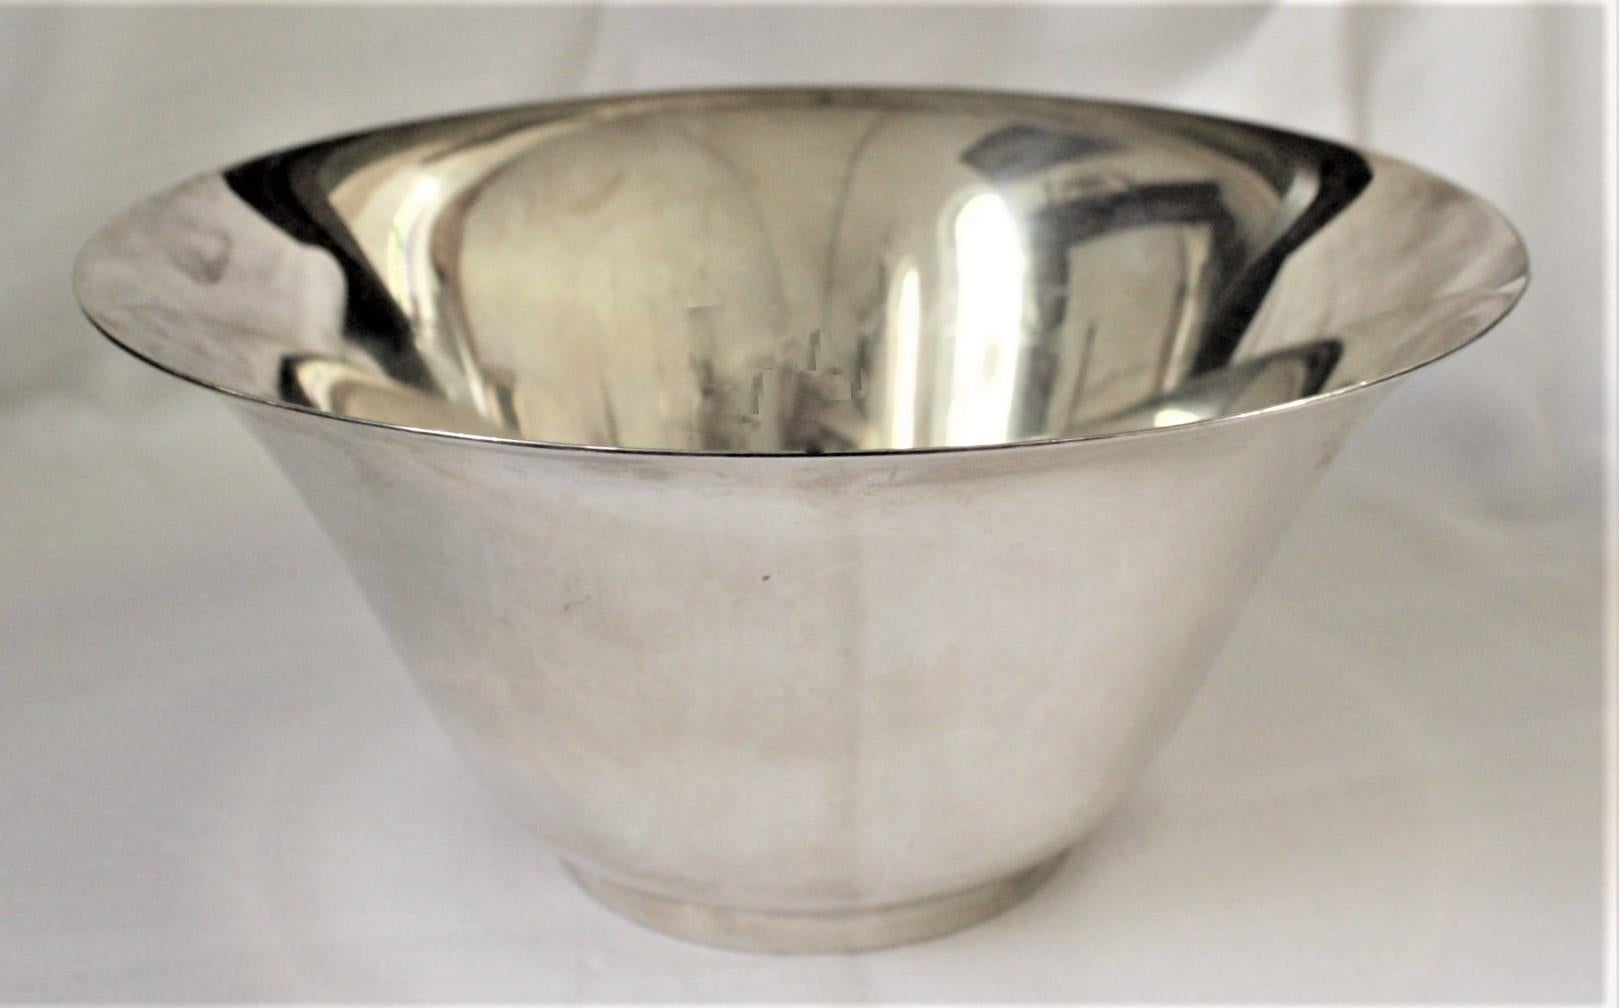 This sterling silver bowl was made for Tiffany & Co. in the United States in circa 1930 in a Modernist style. This is a large and considerably heavy example for this style of bowl done by Tiffany and has sleek flared sides and rim and a squat footed